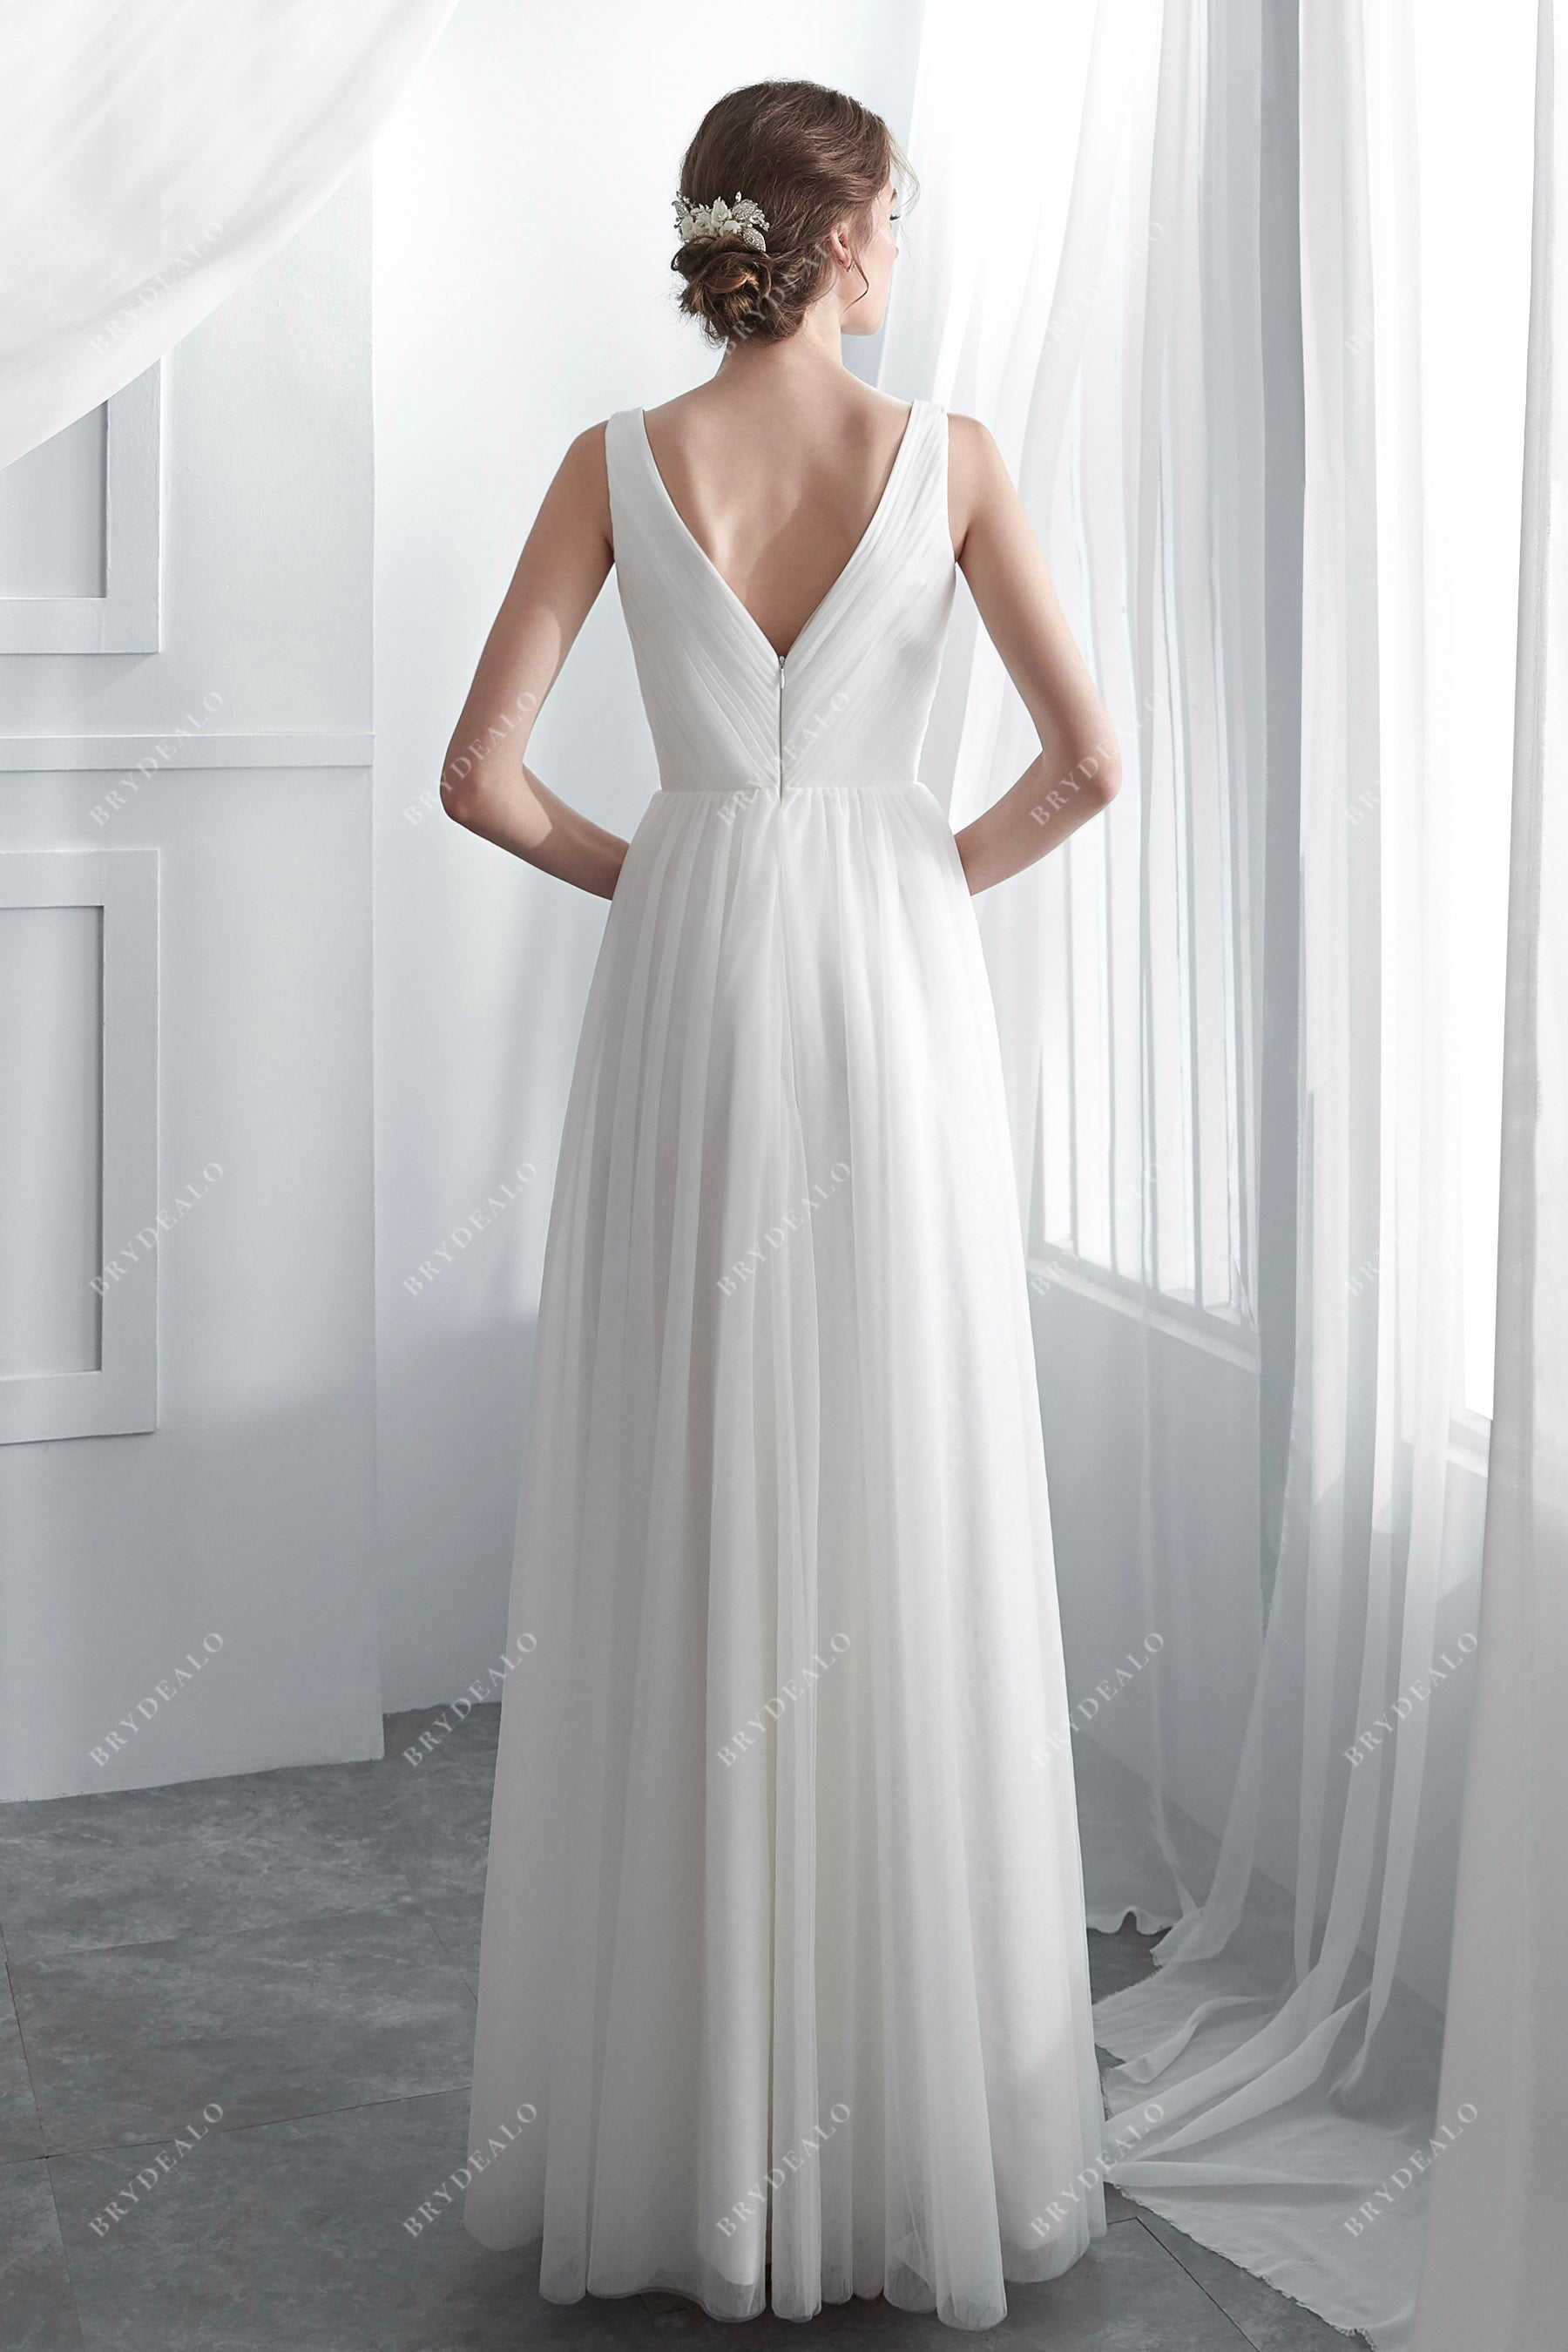 9 A-Line Wedding Dresses to Fall in love with